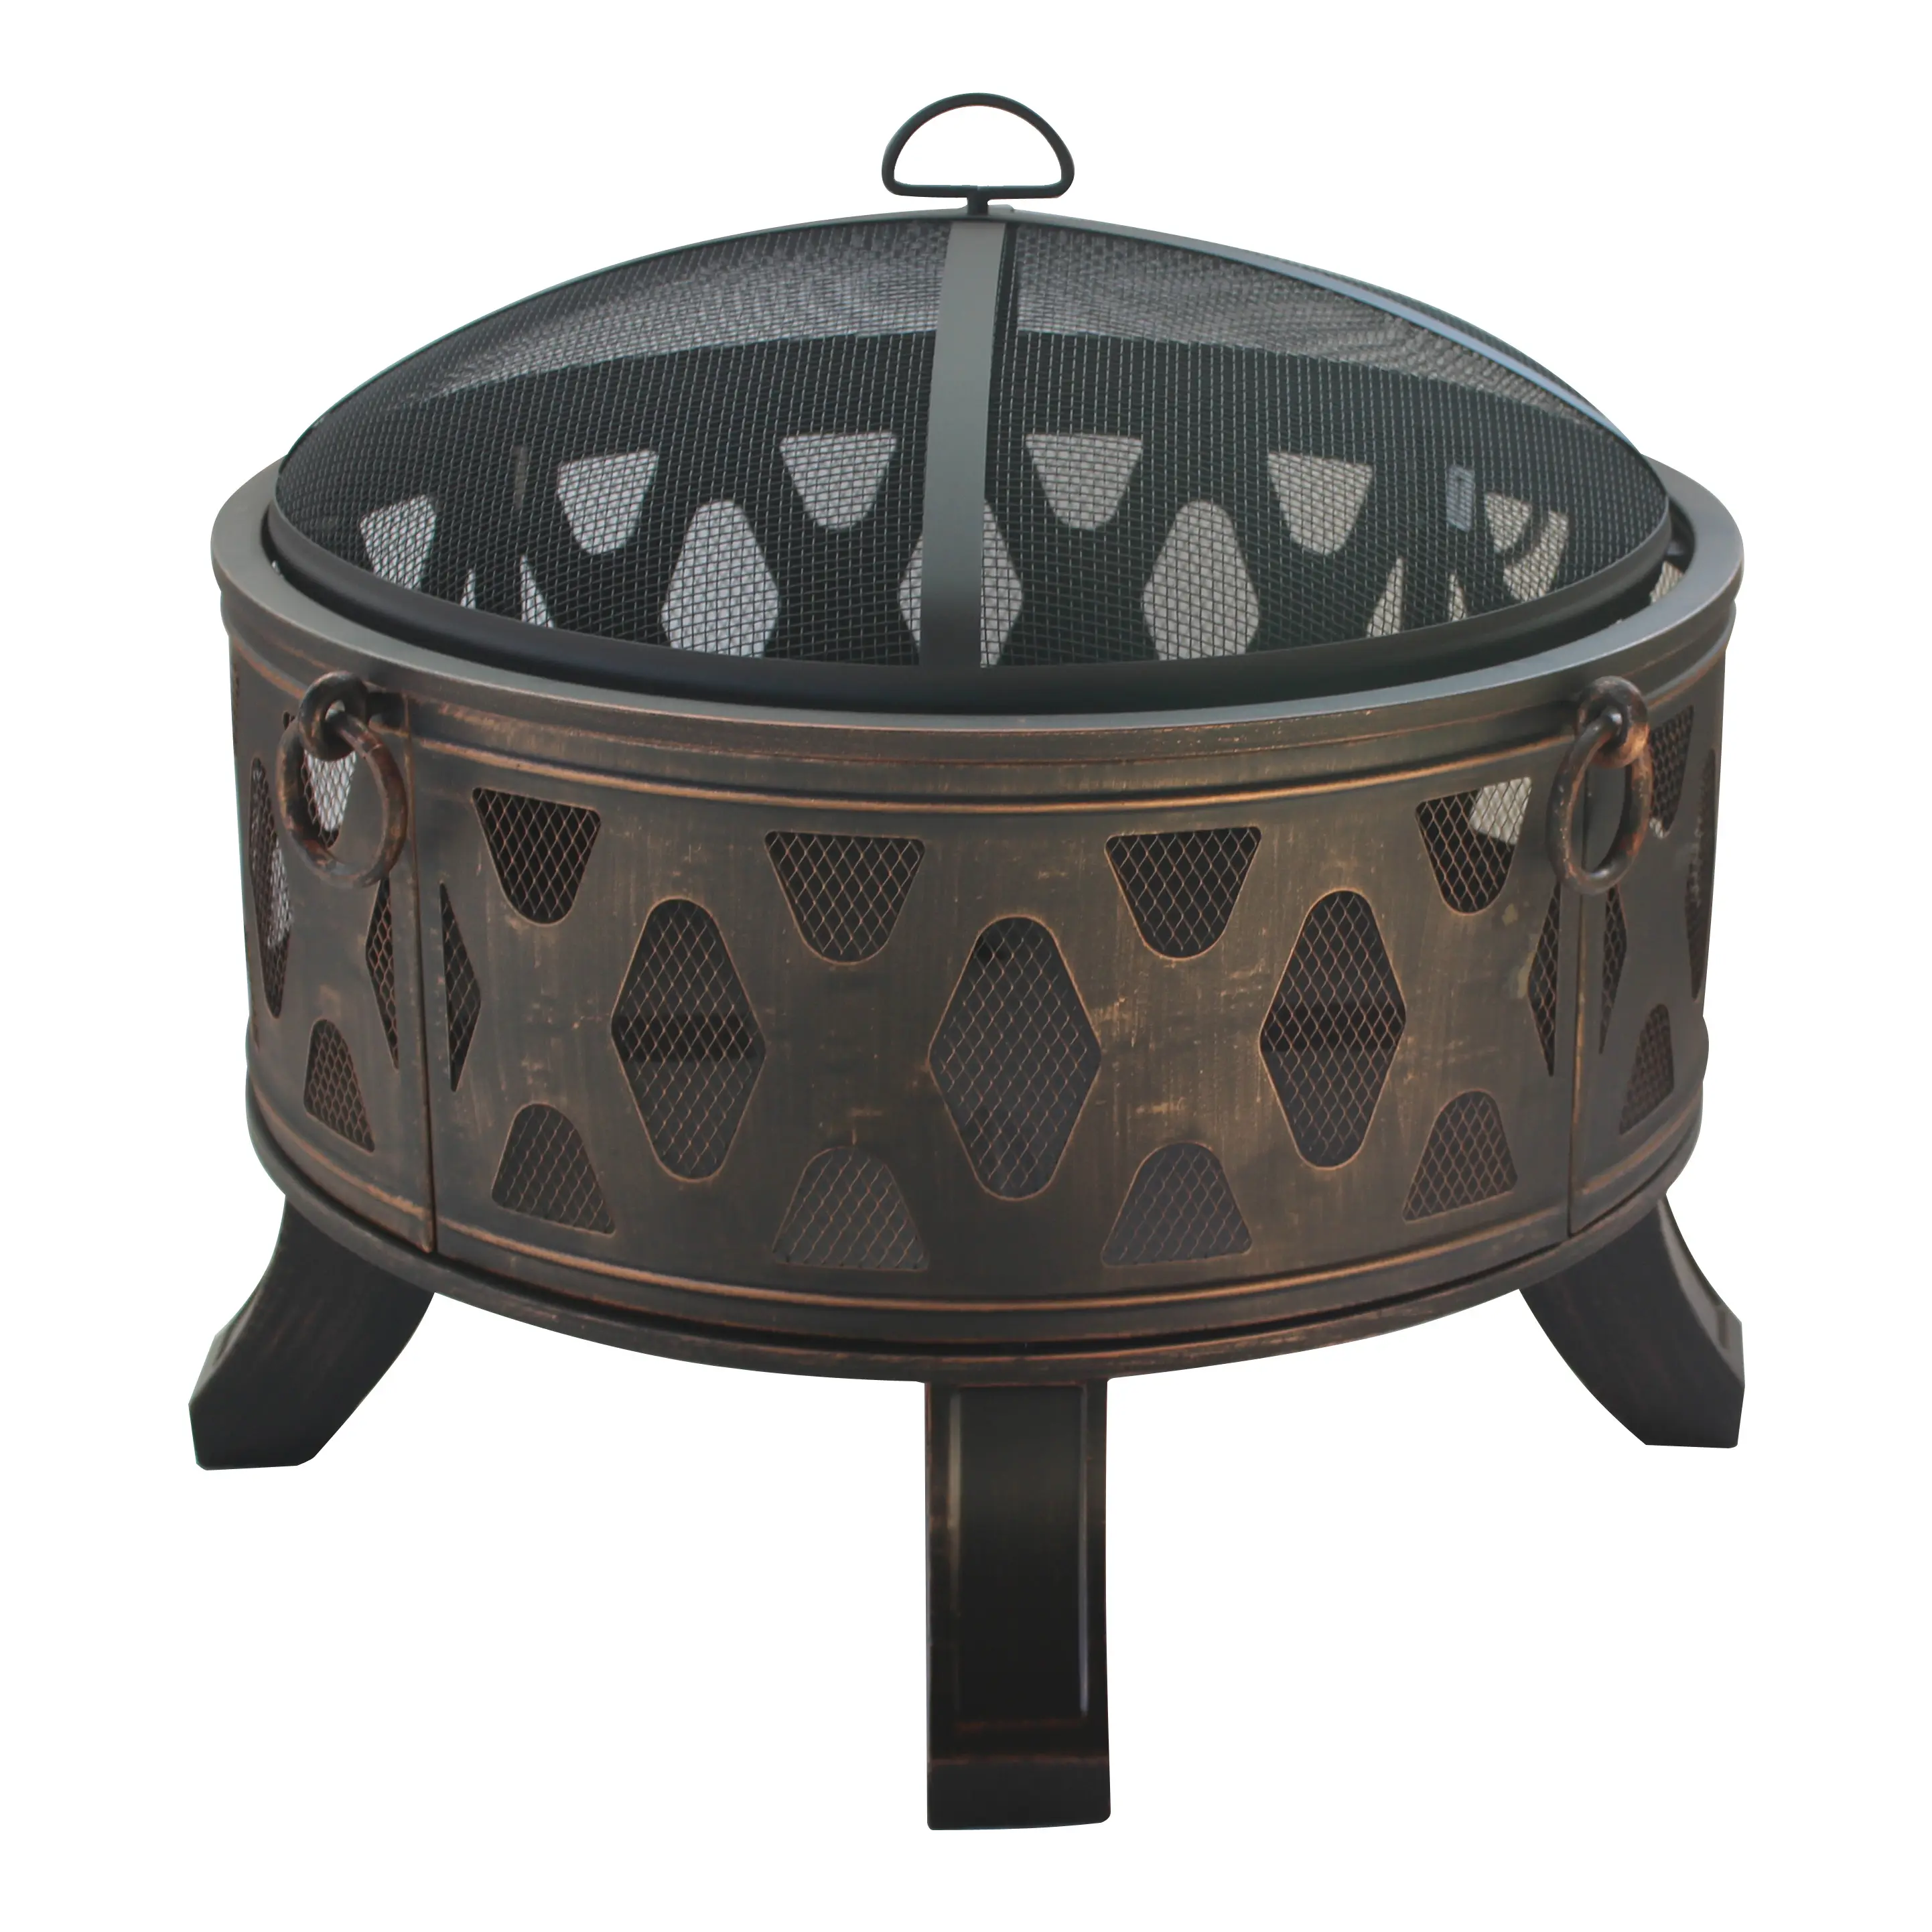 Manufacturers Outdoor Round Fire Pit with Diamond design Bonfire Wood Burner with cover and grill